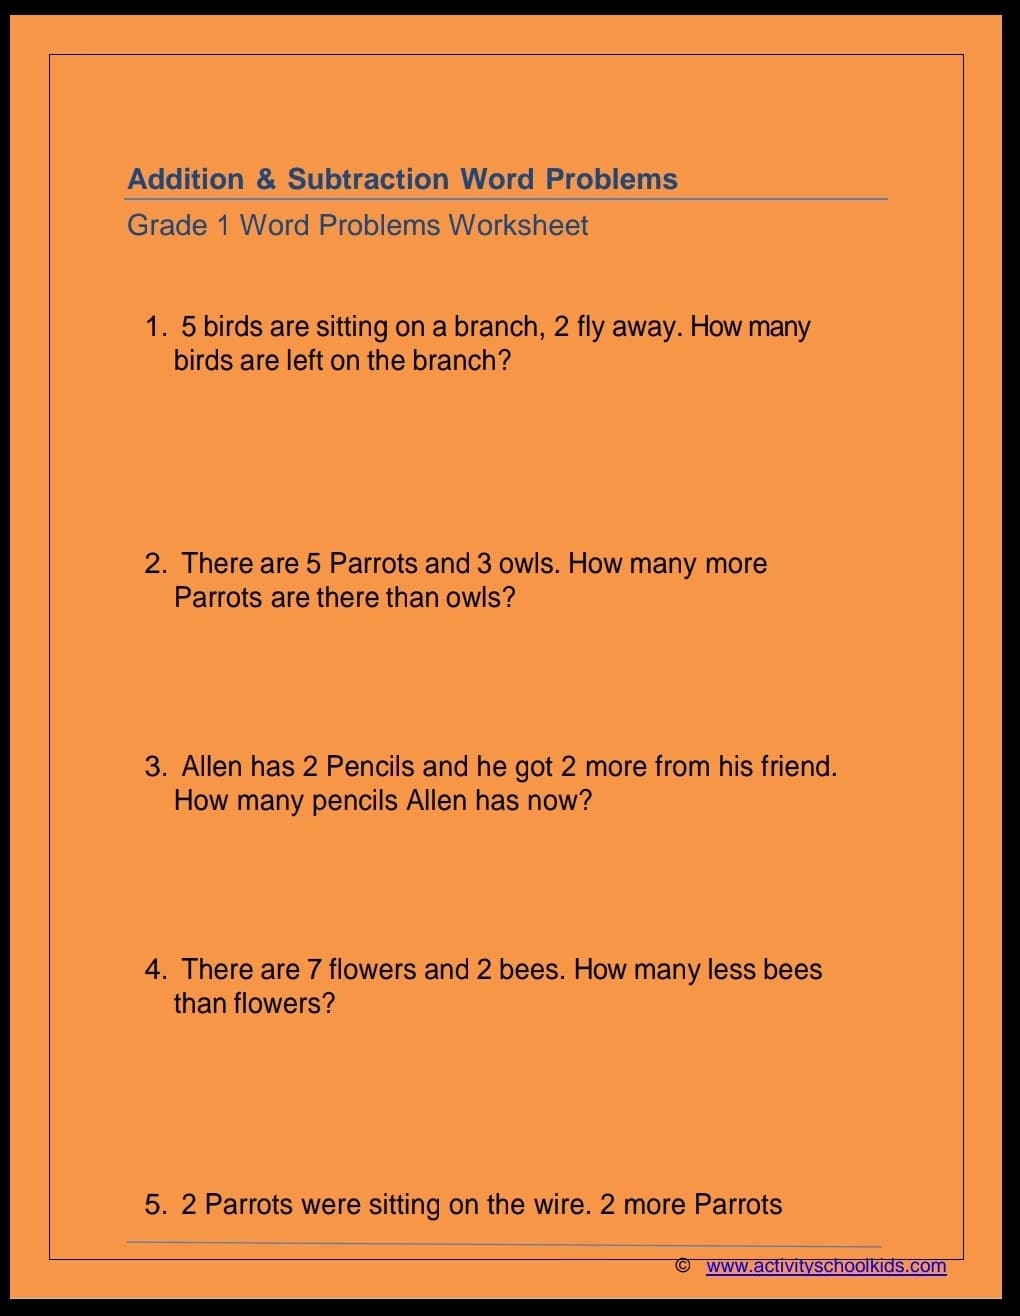 41-addition-and-subtraction-word-problems-first-grade-edublog-solution-for-schools